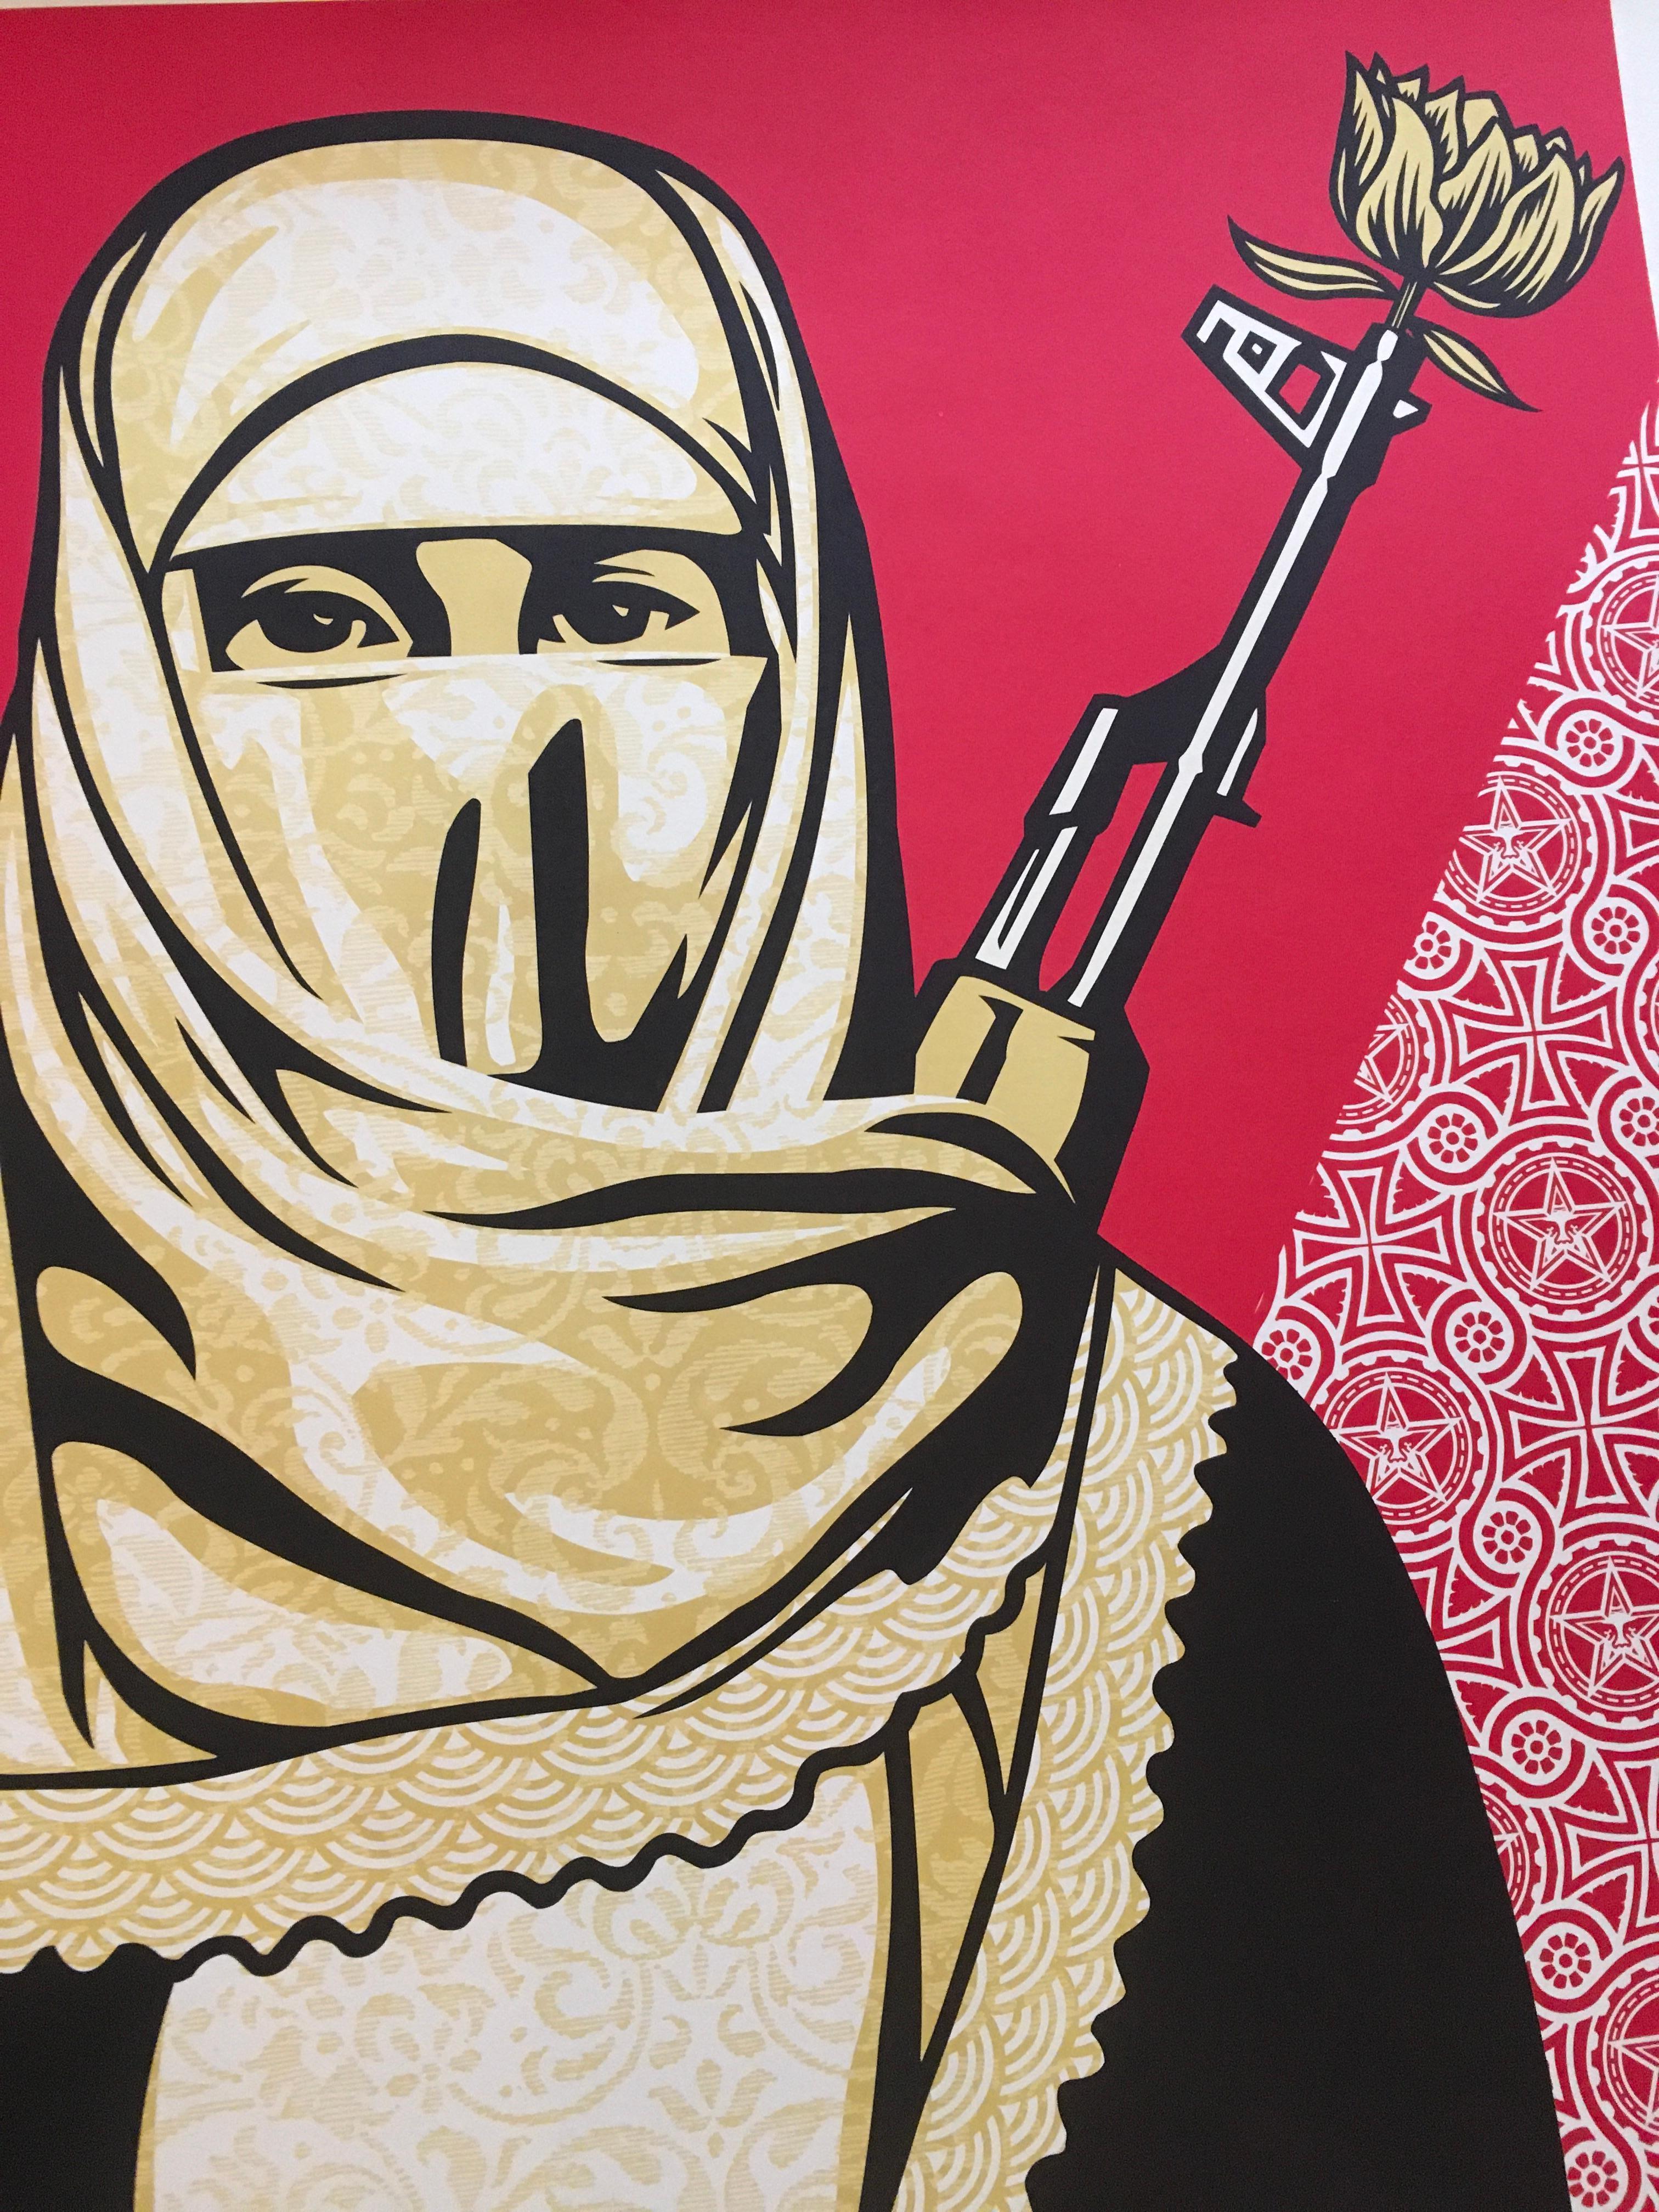 'Muslim Woman' by Shepard Fairey, 2005
24 x 36 inches (61 x 91,4 cm)
Offset Lithograph on  Fine Art Paper.
Limited edition of 750 (AP)
Hand-signed and dated in pencil by Shepard Fairey. Signature and date appear on the bottom right, the number on